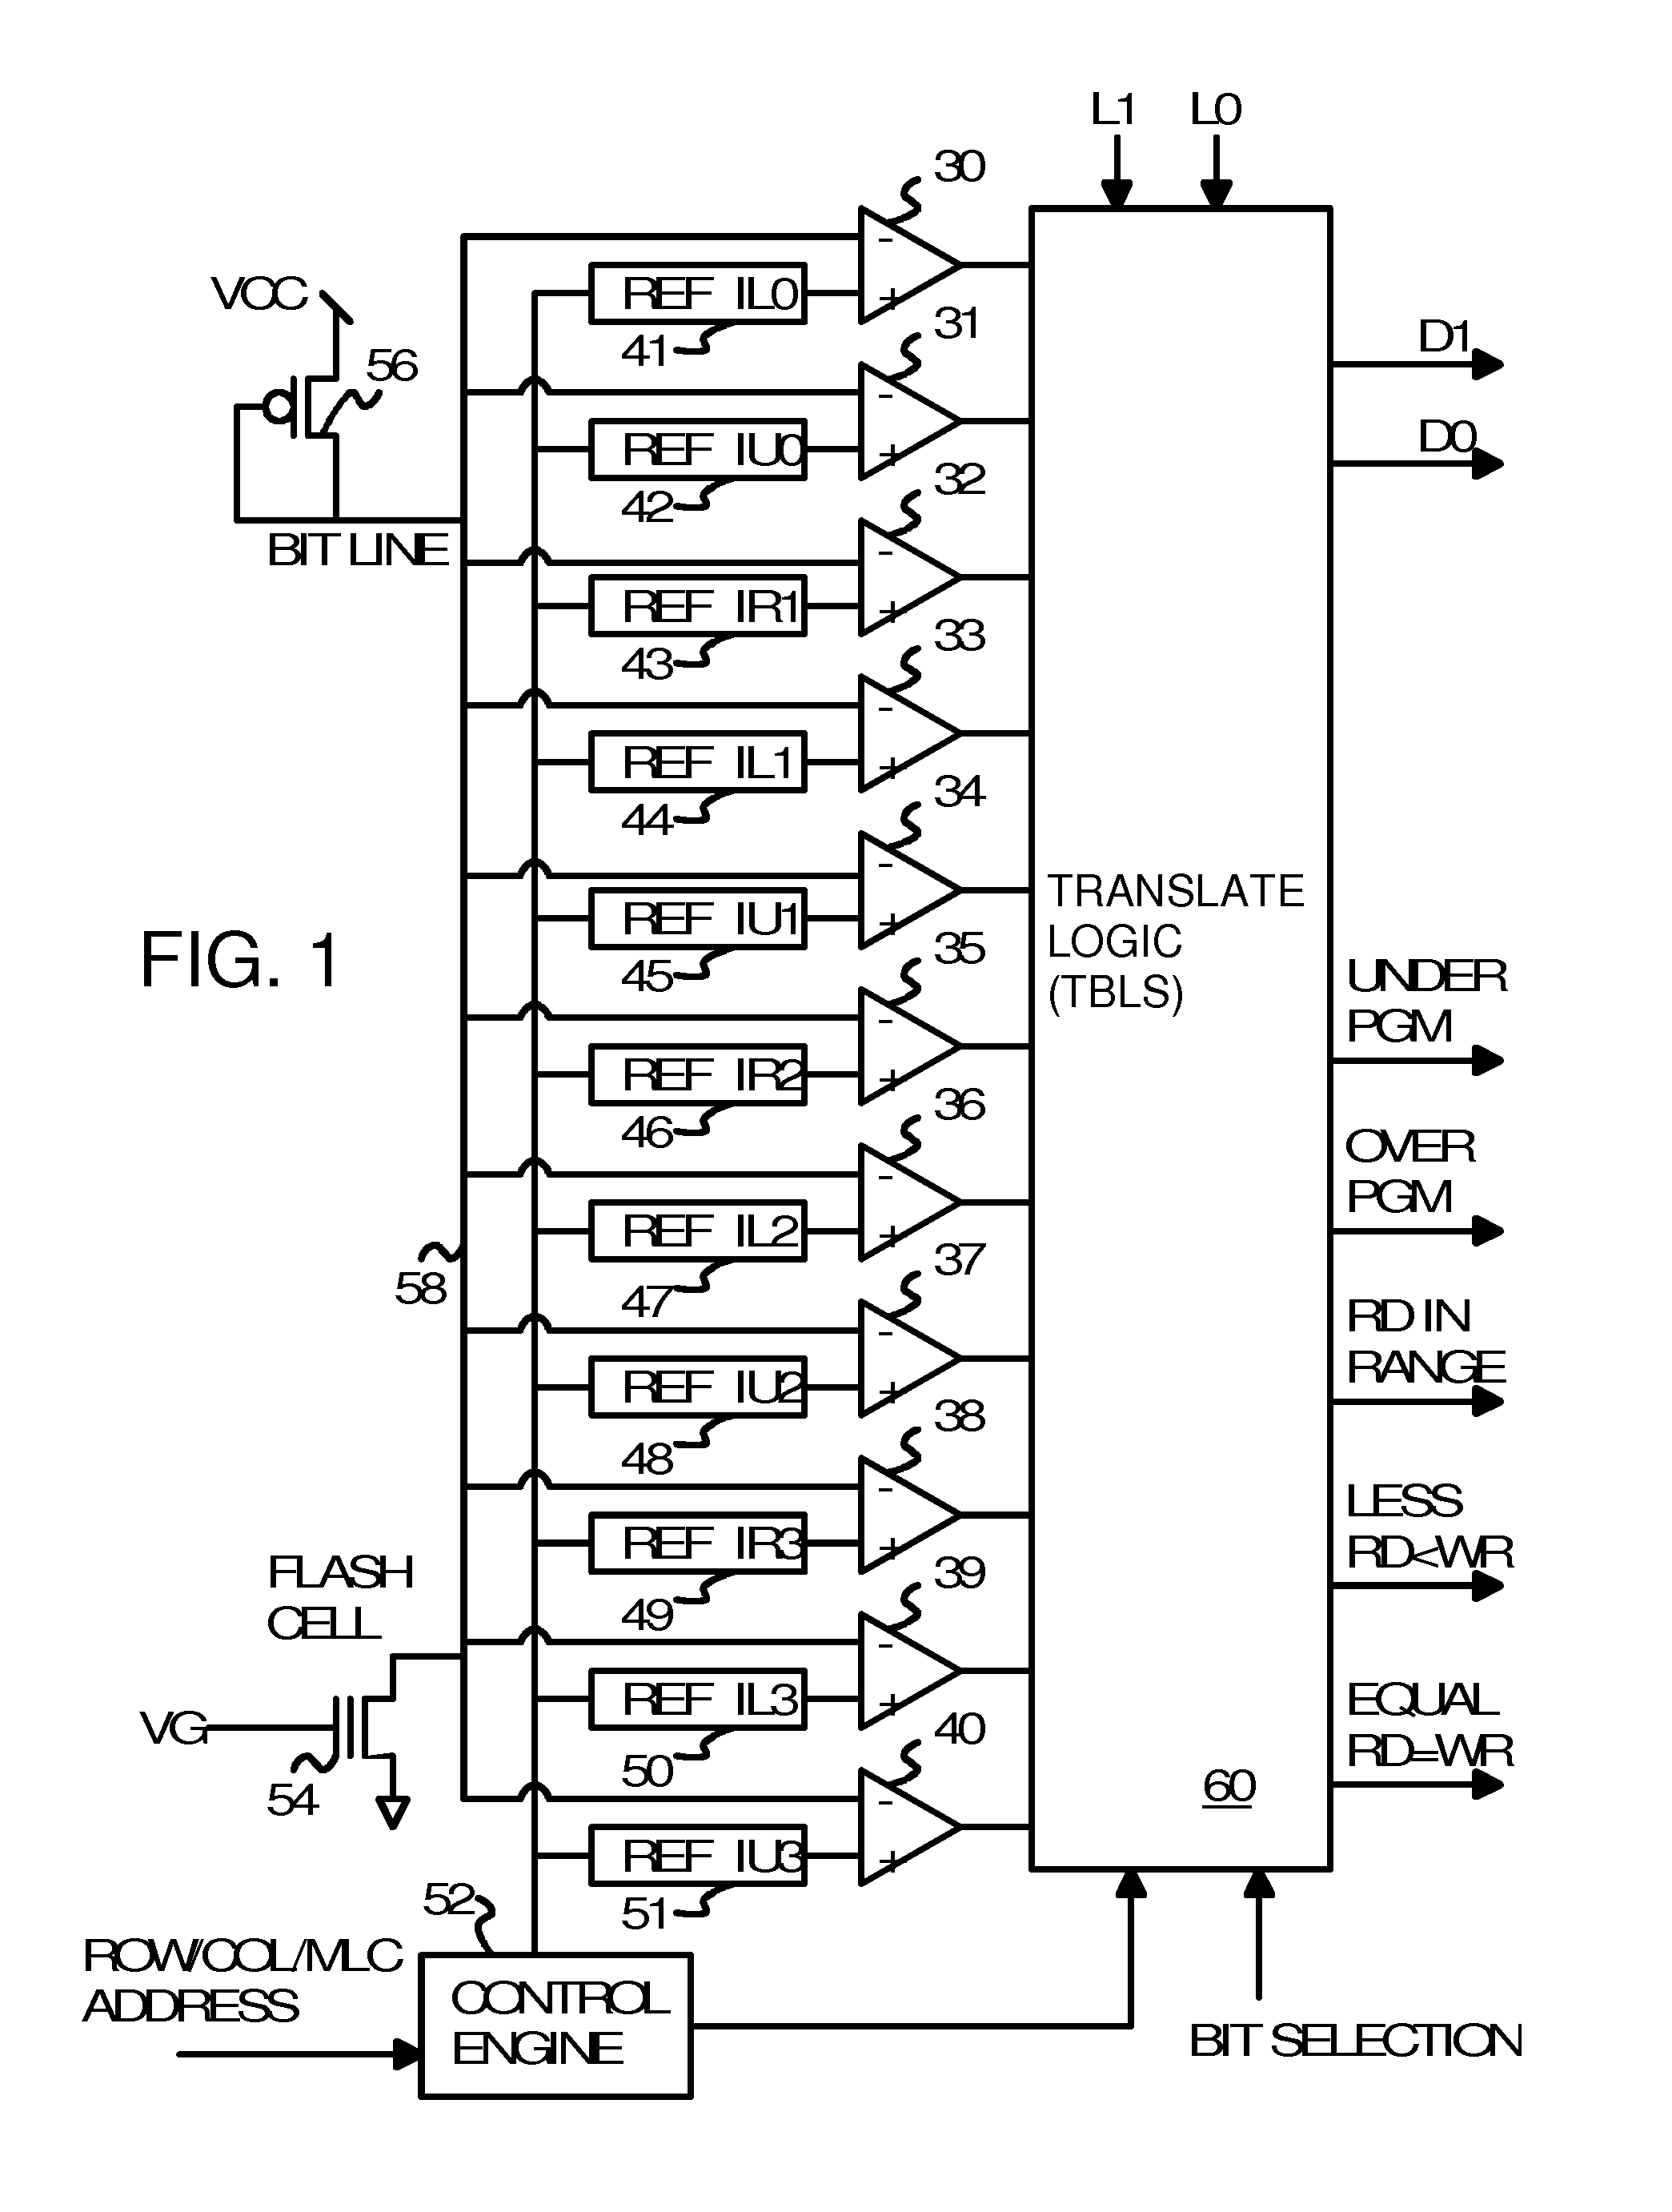 Endurance and retention flash controller with programmable binary-levels-per-cell bits identifying pages or blocks as having triple, multi, or single-level flash-memory cells